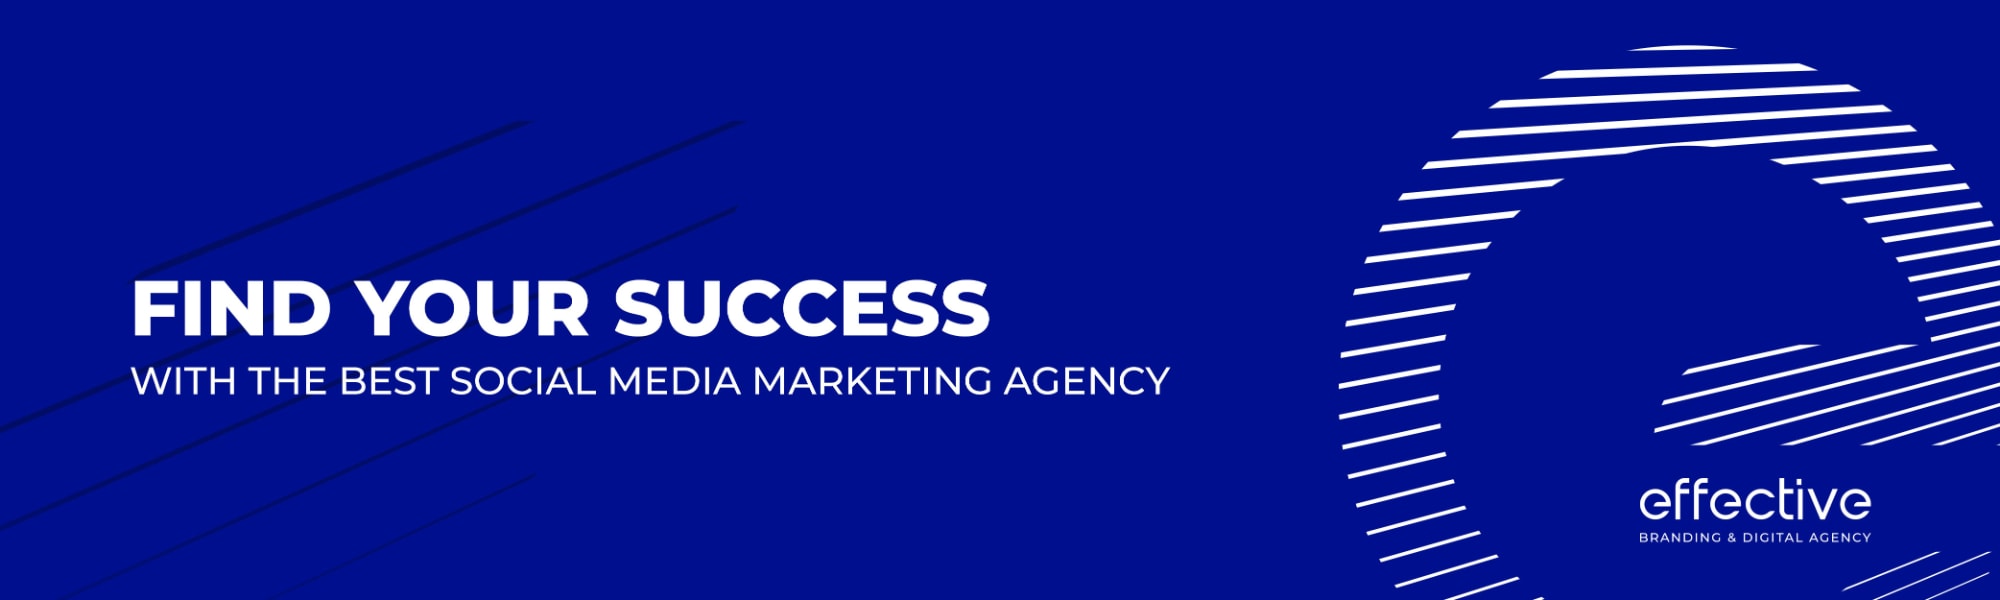 Find Your Success with the Best Social Media Marketing Agency